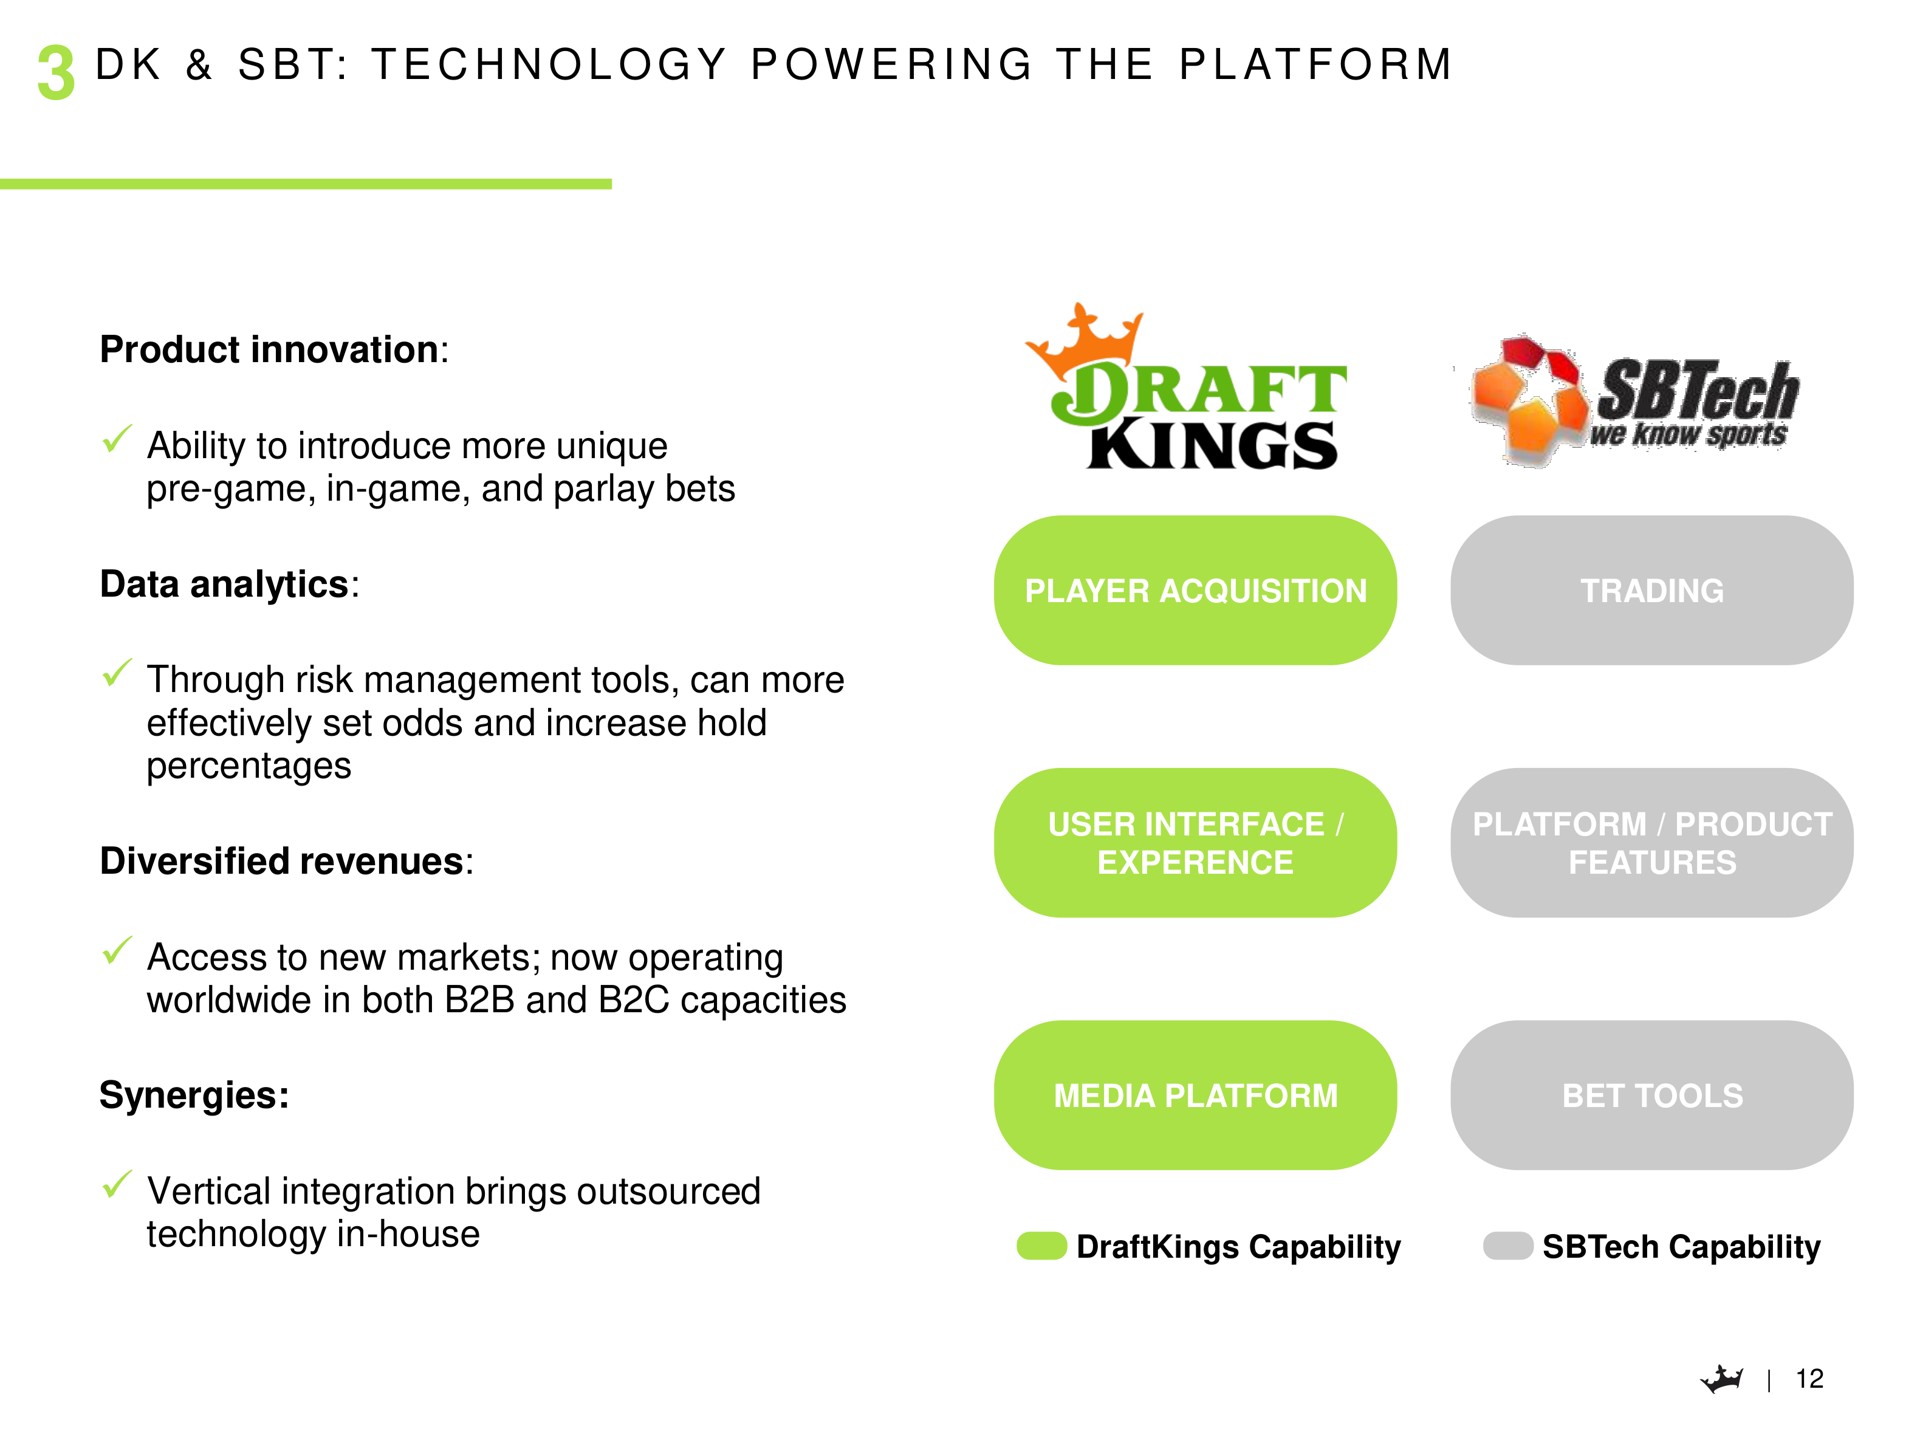 i at technology powering the platform product innovation ability to introduce more unique game in game and parlay bets data analytics percentages access to new markets now operating in both and capacities synergies vertical integration brings draft kings of we know sports | DraftKings